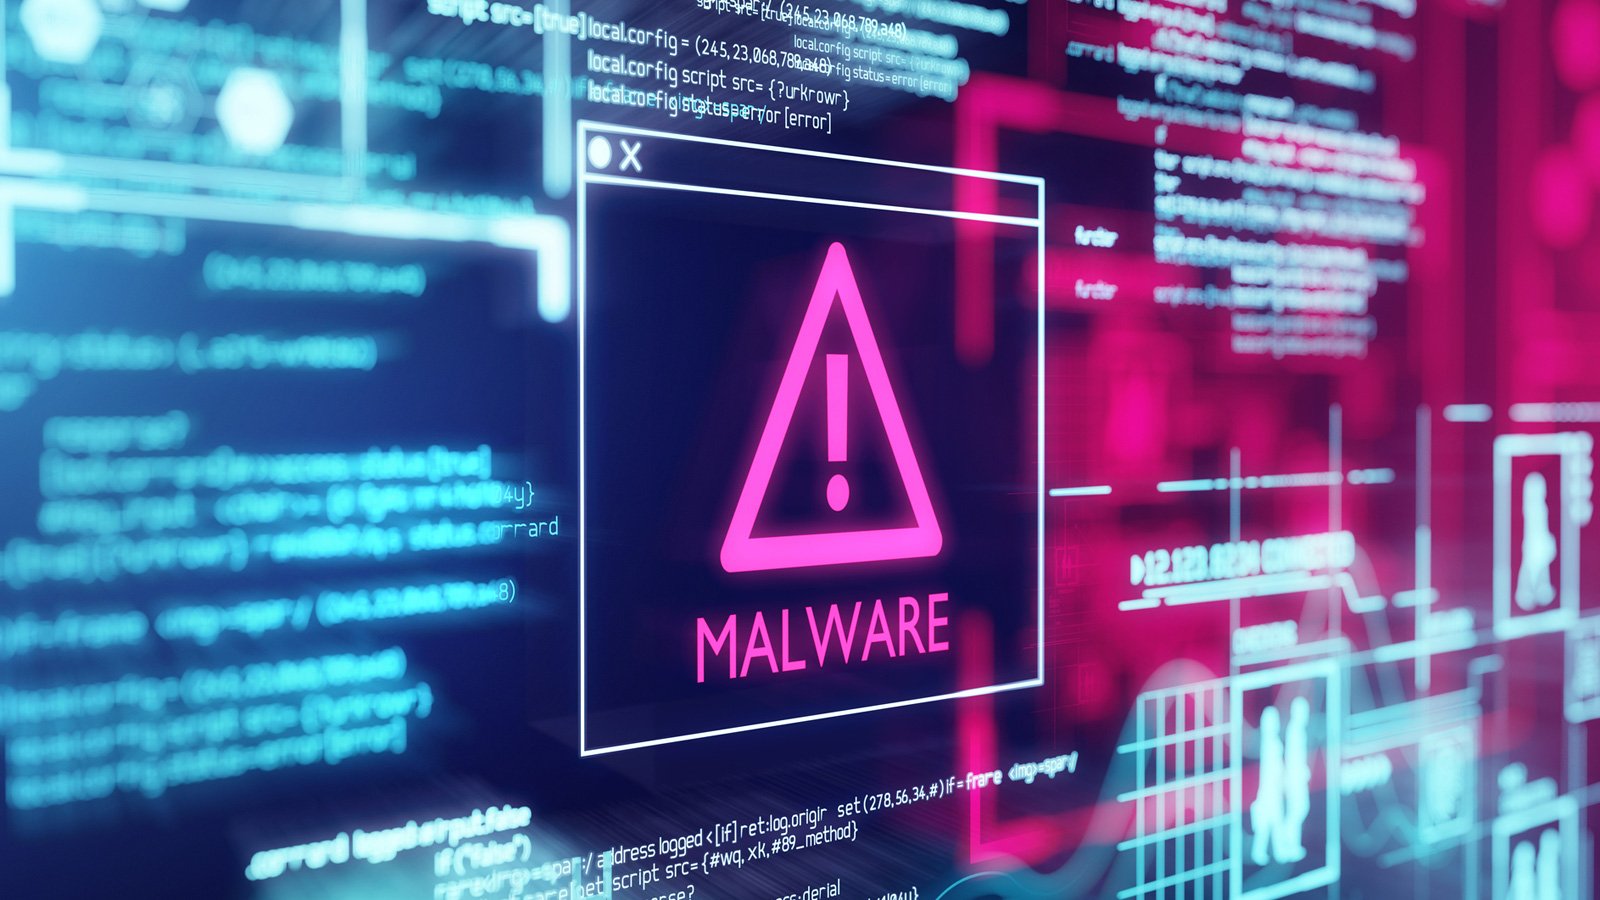 New Mimic ransomware abuses ‘Everything’ Windows search tool